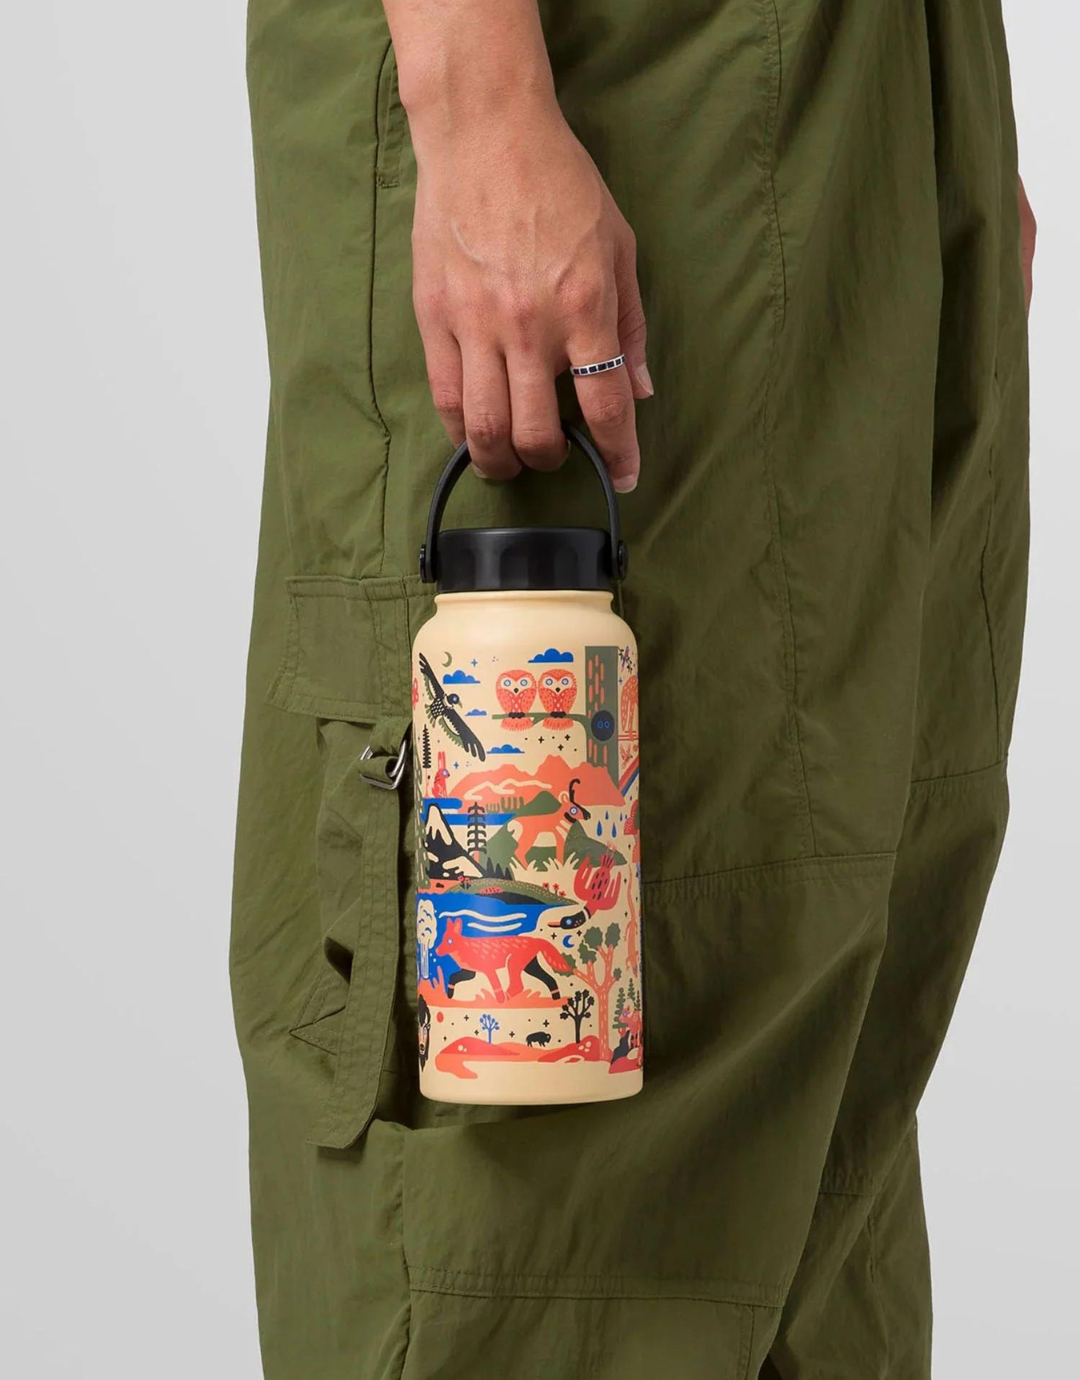 National Parks Founded 32oz. Insulated Water Bottle